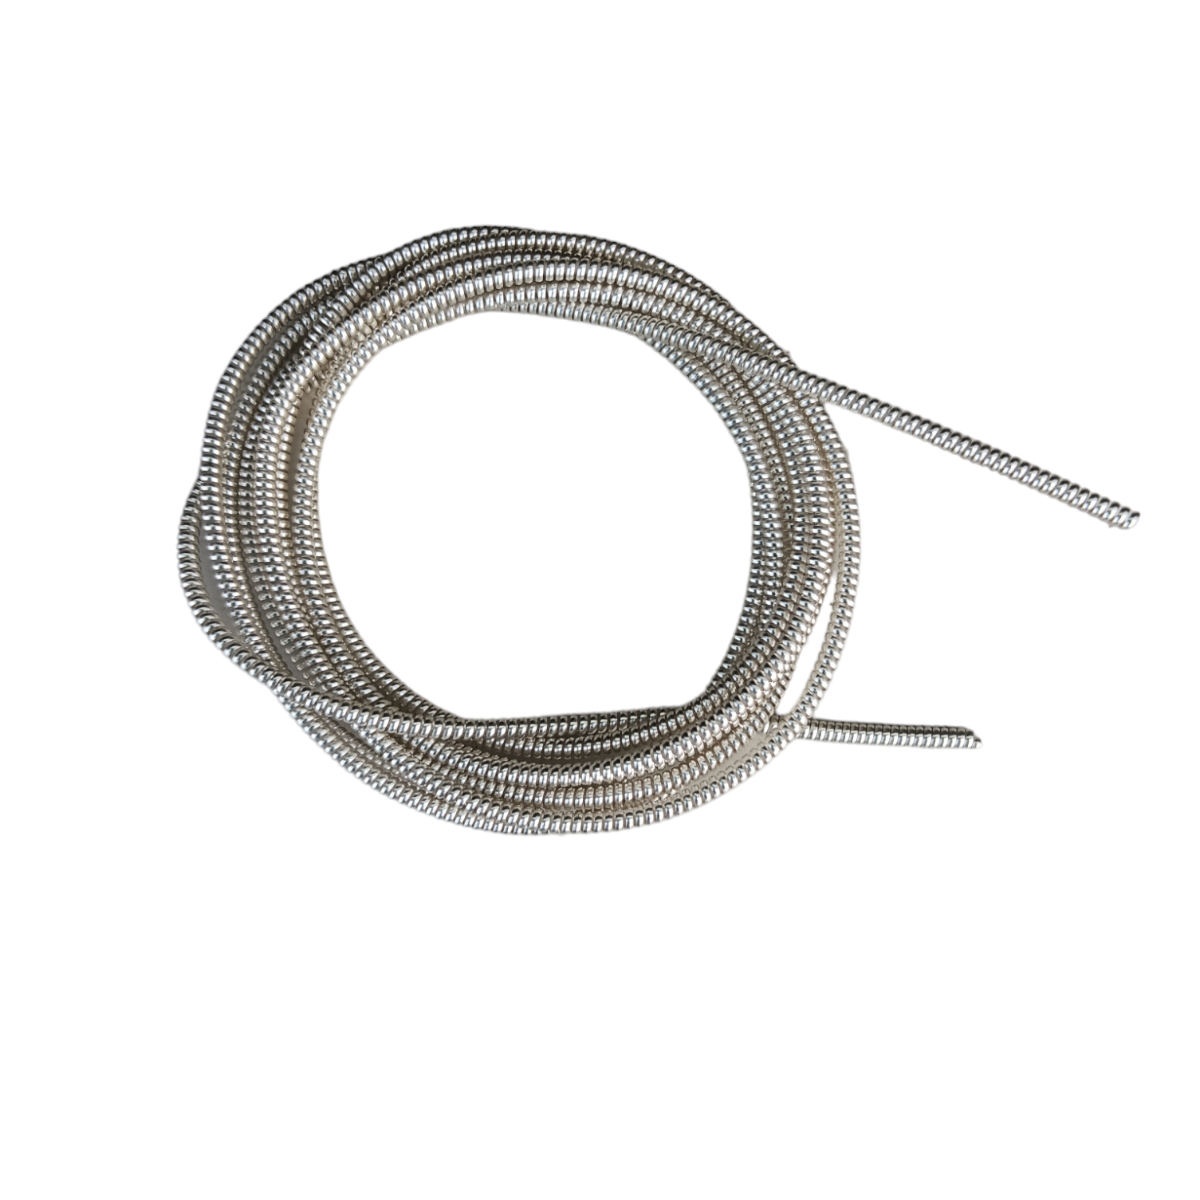 1 METRE 1.90MM DIAMETER SILVER PLATED PERL WIRE